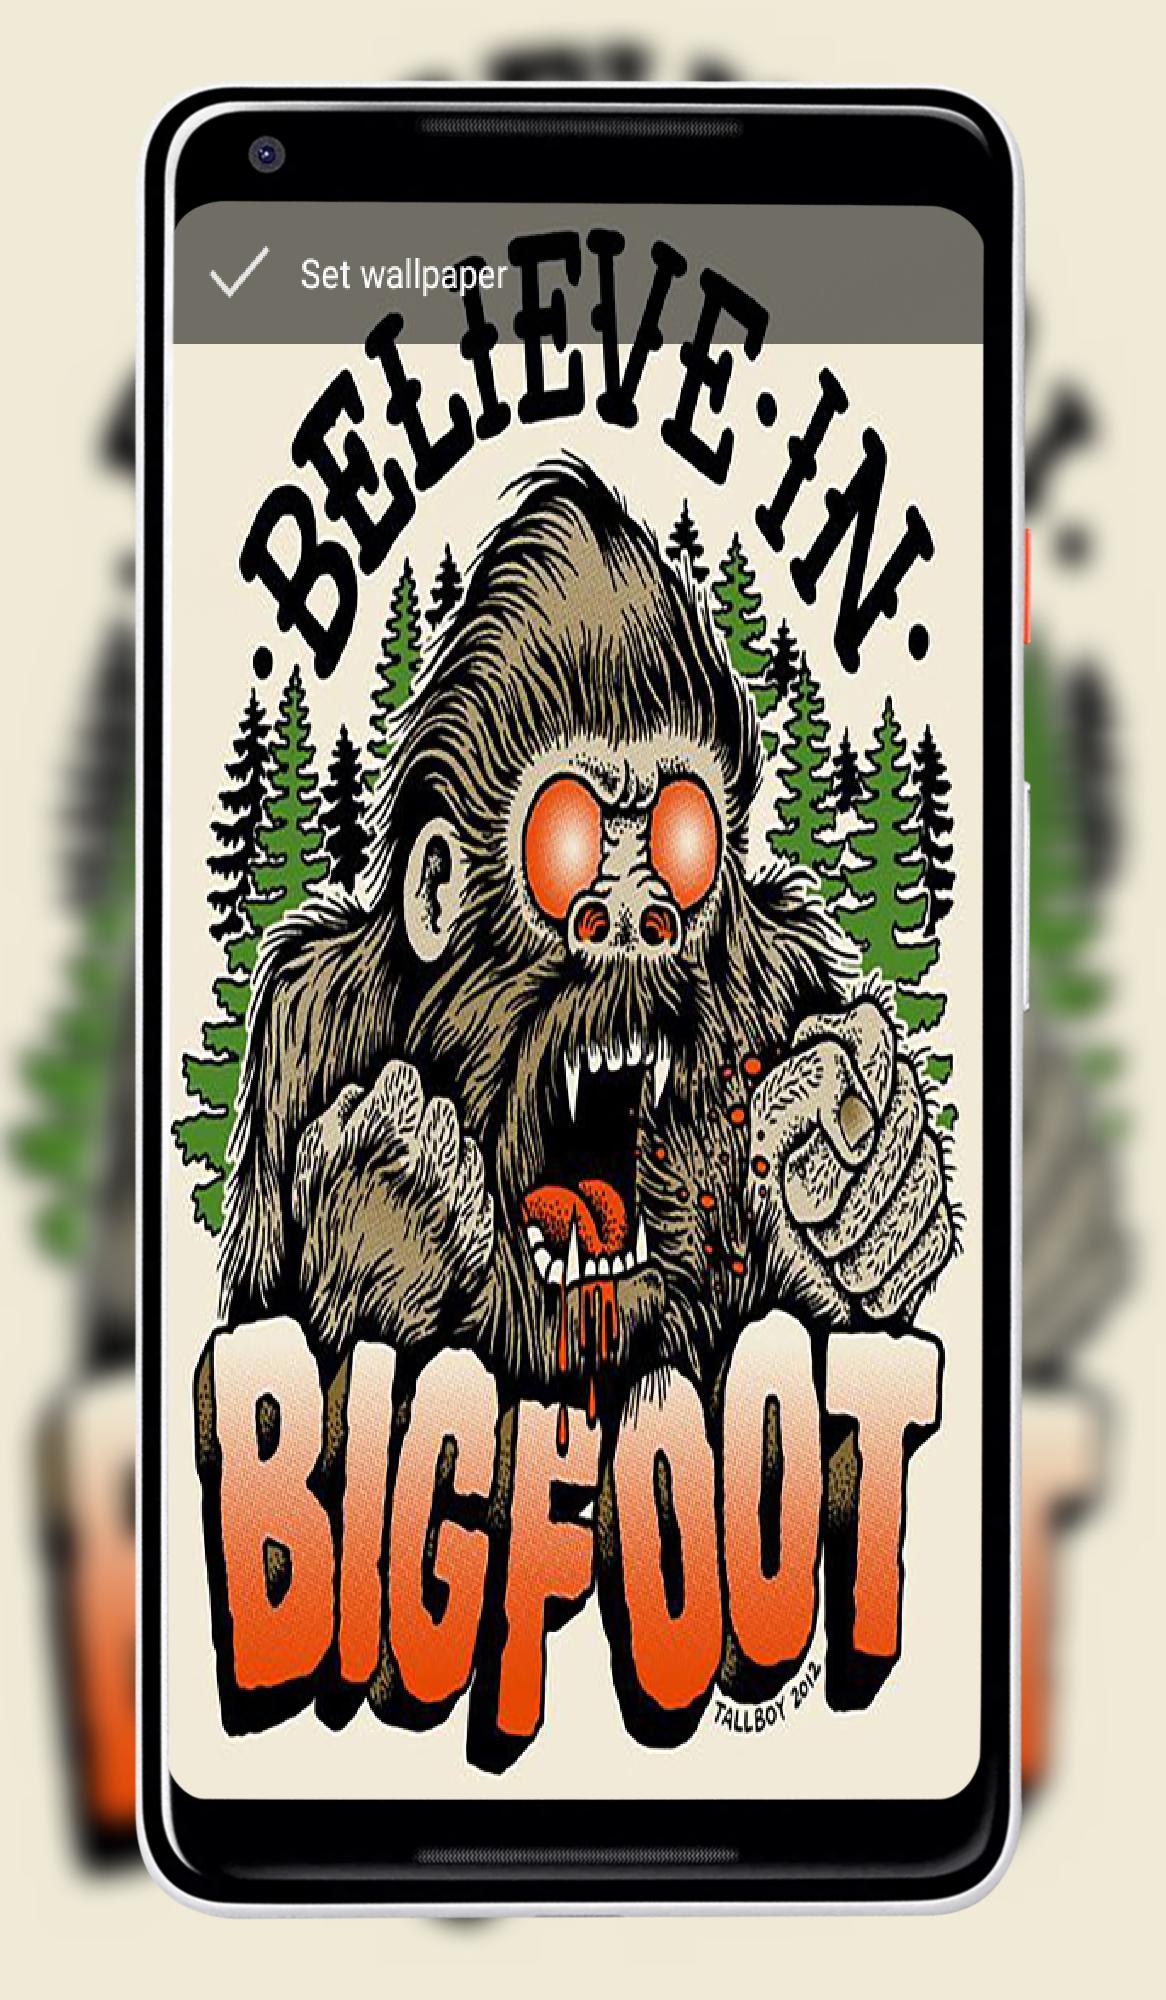 Bigfoot and Yeti Wallpaper for Android - APK Download